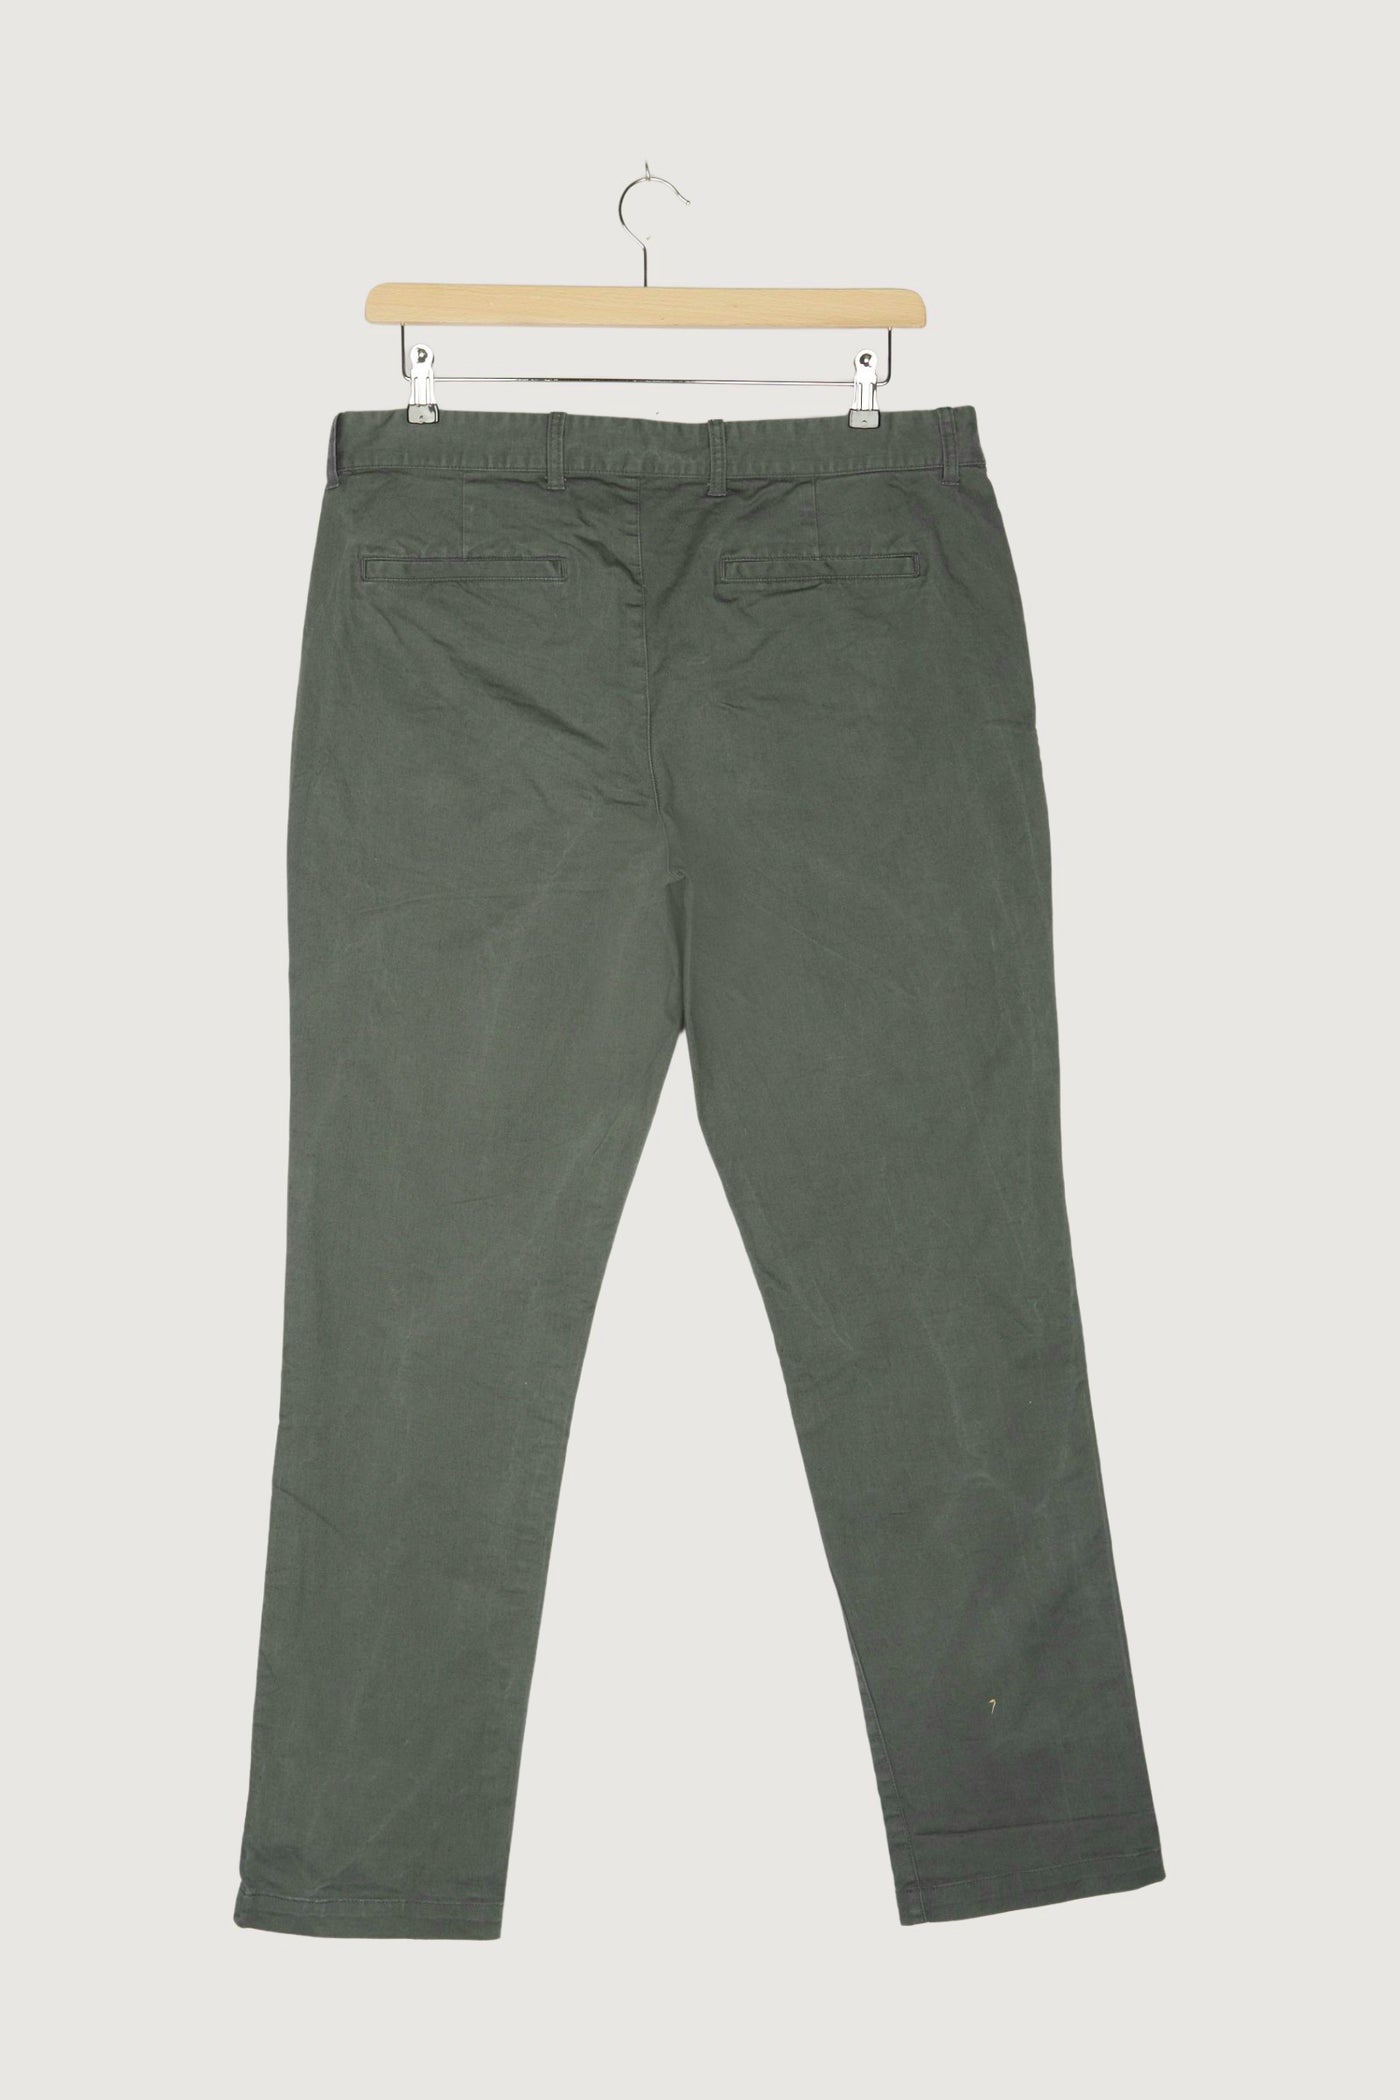 Secondhand Twill Chino Straight Fit